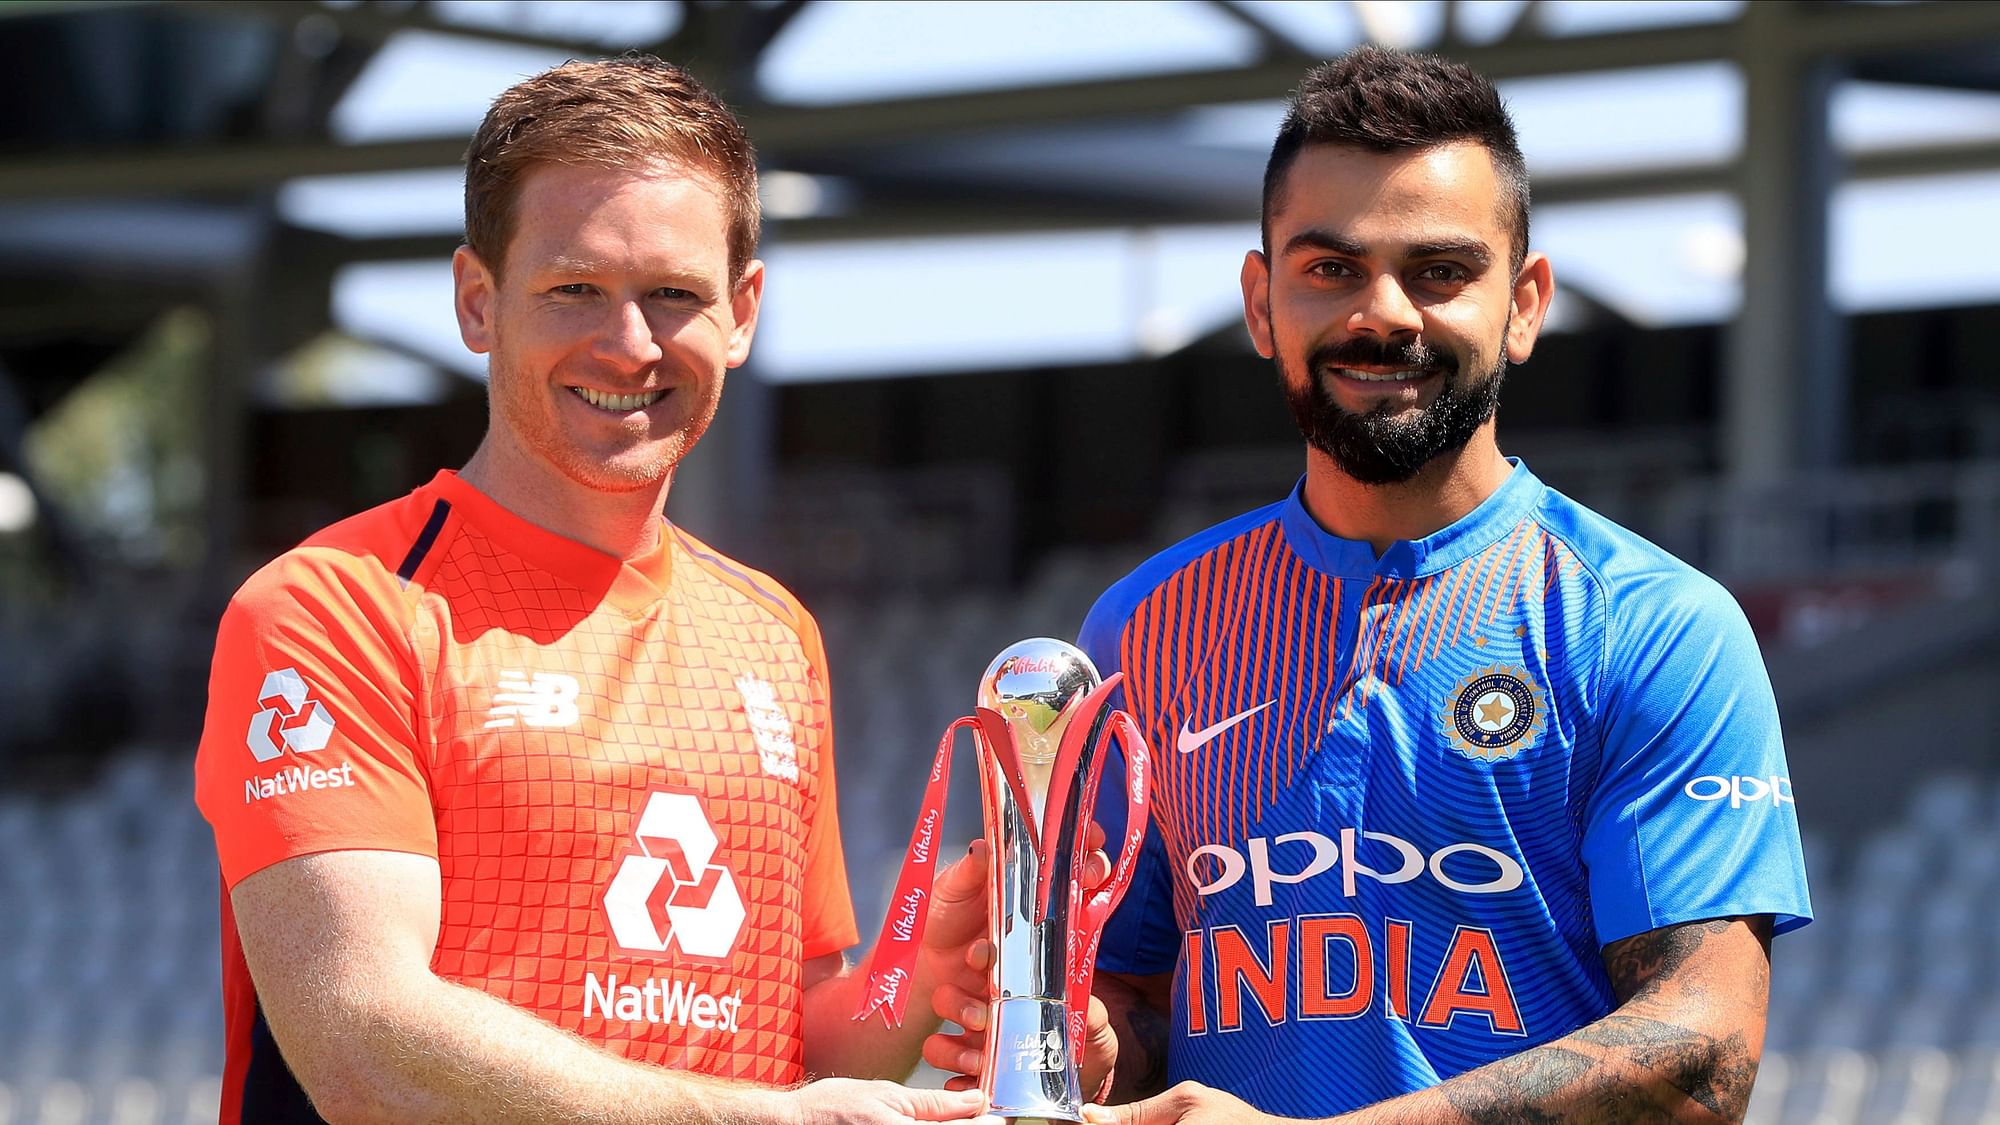 Glenn McGrath has said England and India are the favourites to win the World Cup this summer.